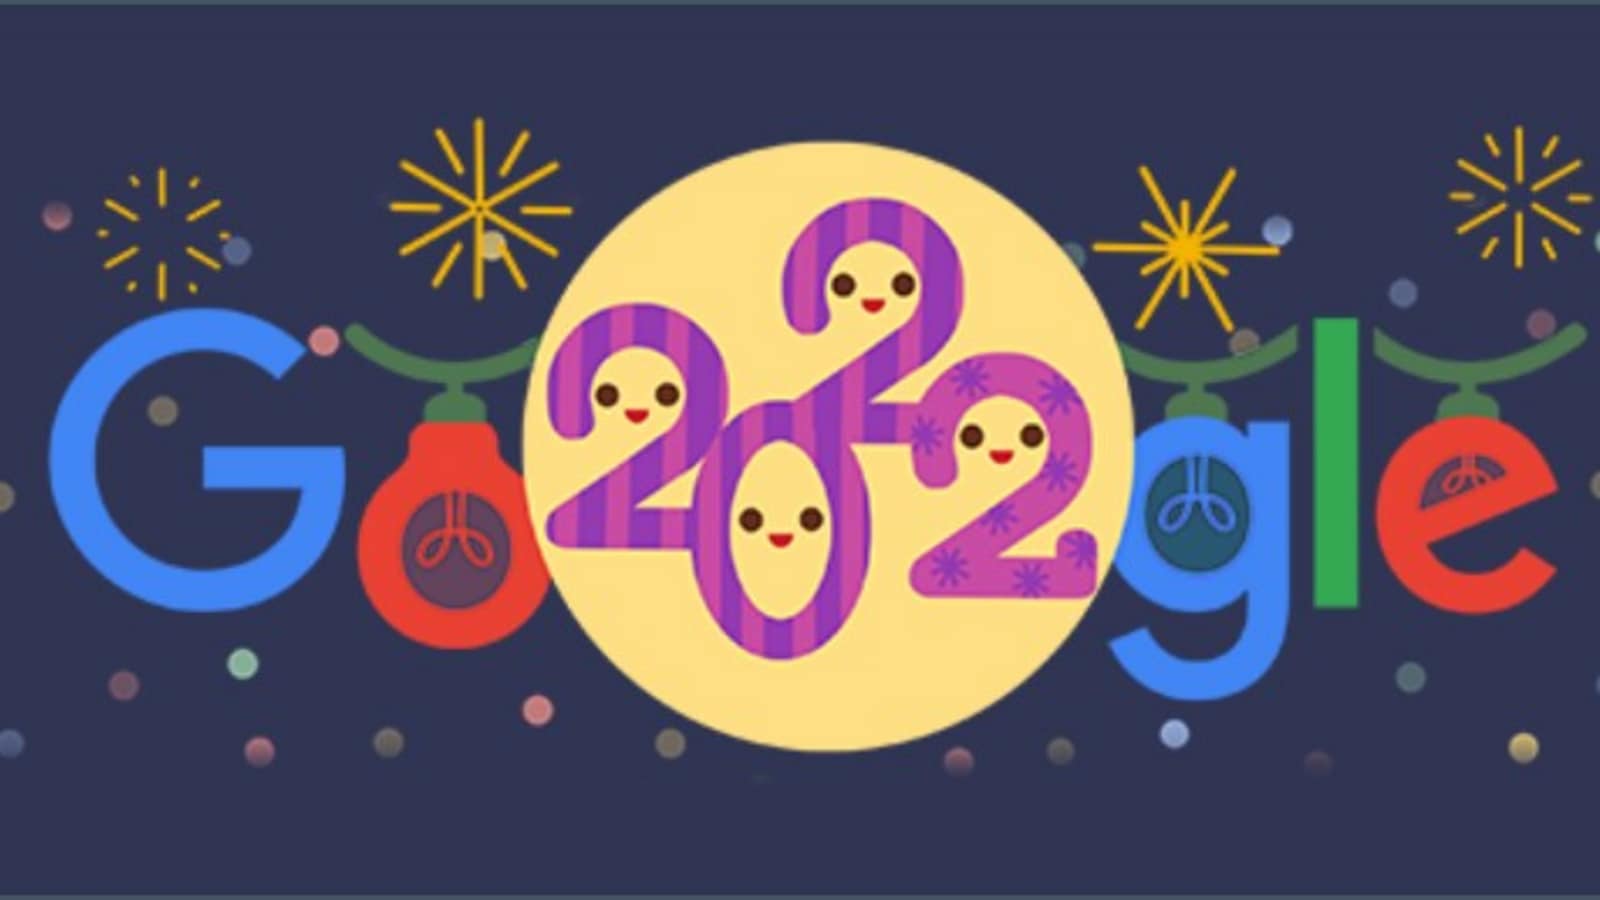 Google Doodle celebrates New Year’s Eve ‘Time to reminisce about 2022